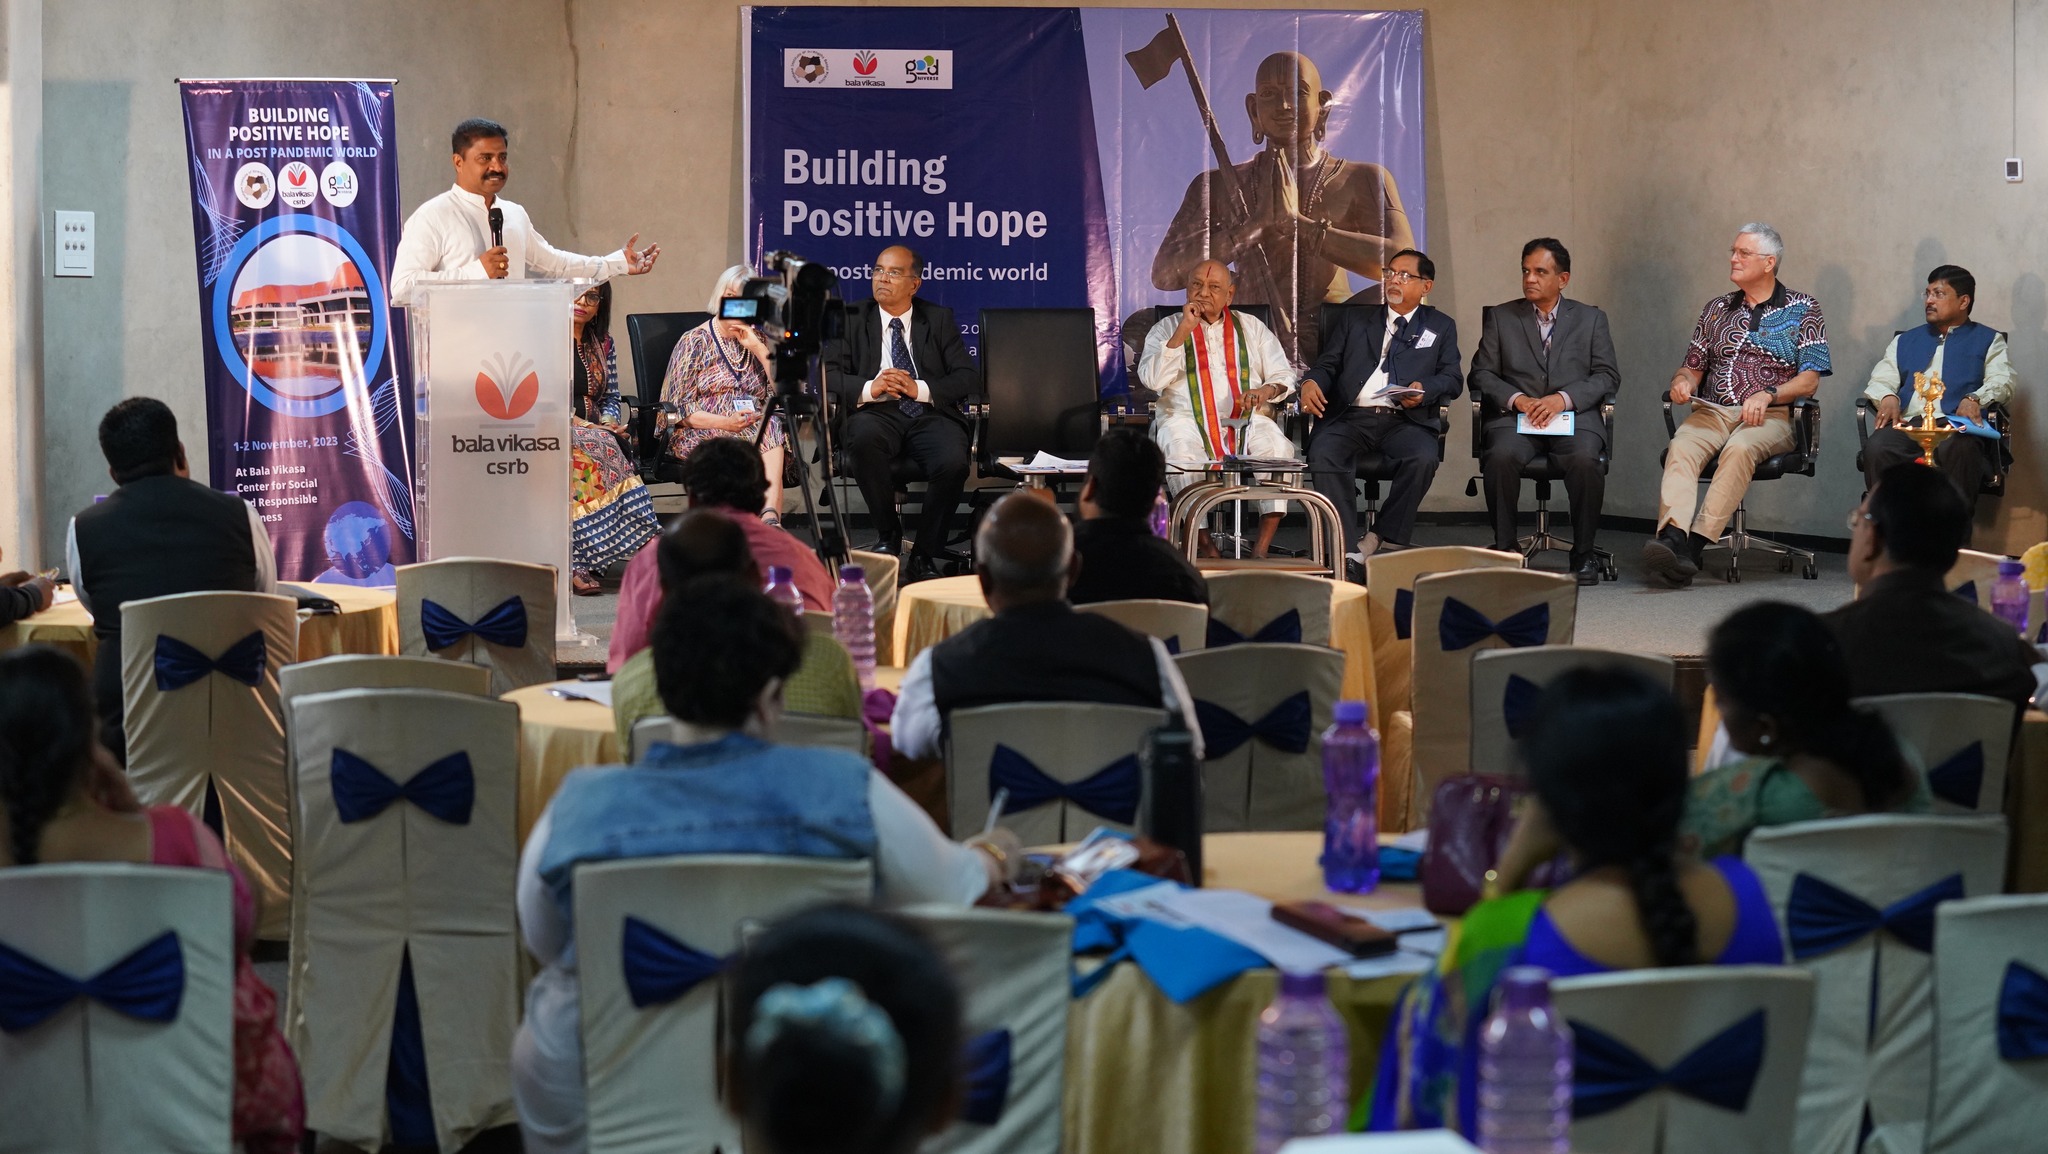 Brisbane Institute of Strengths Based Practice and Bala Vikasa Organise Asia Pacific Conference on Building Hope